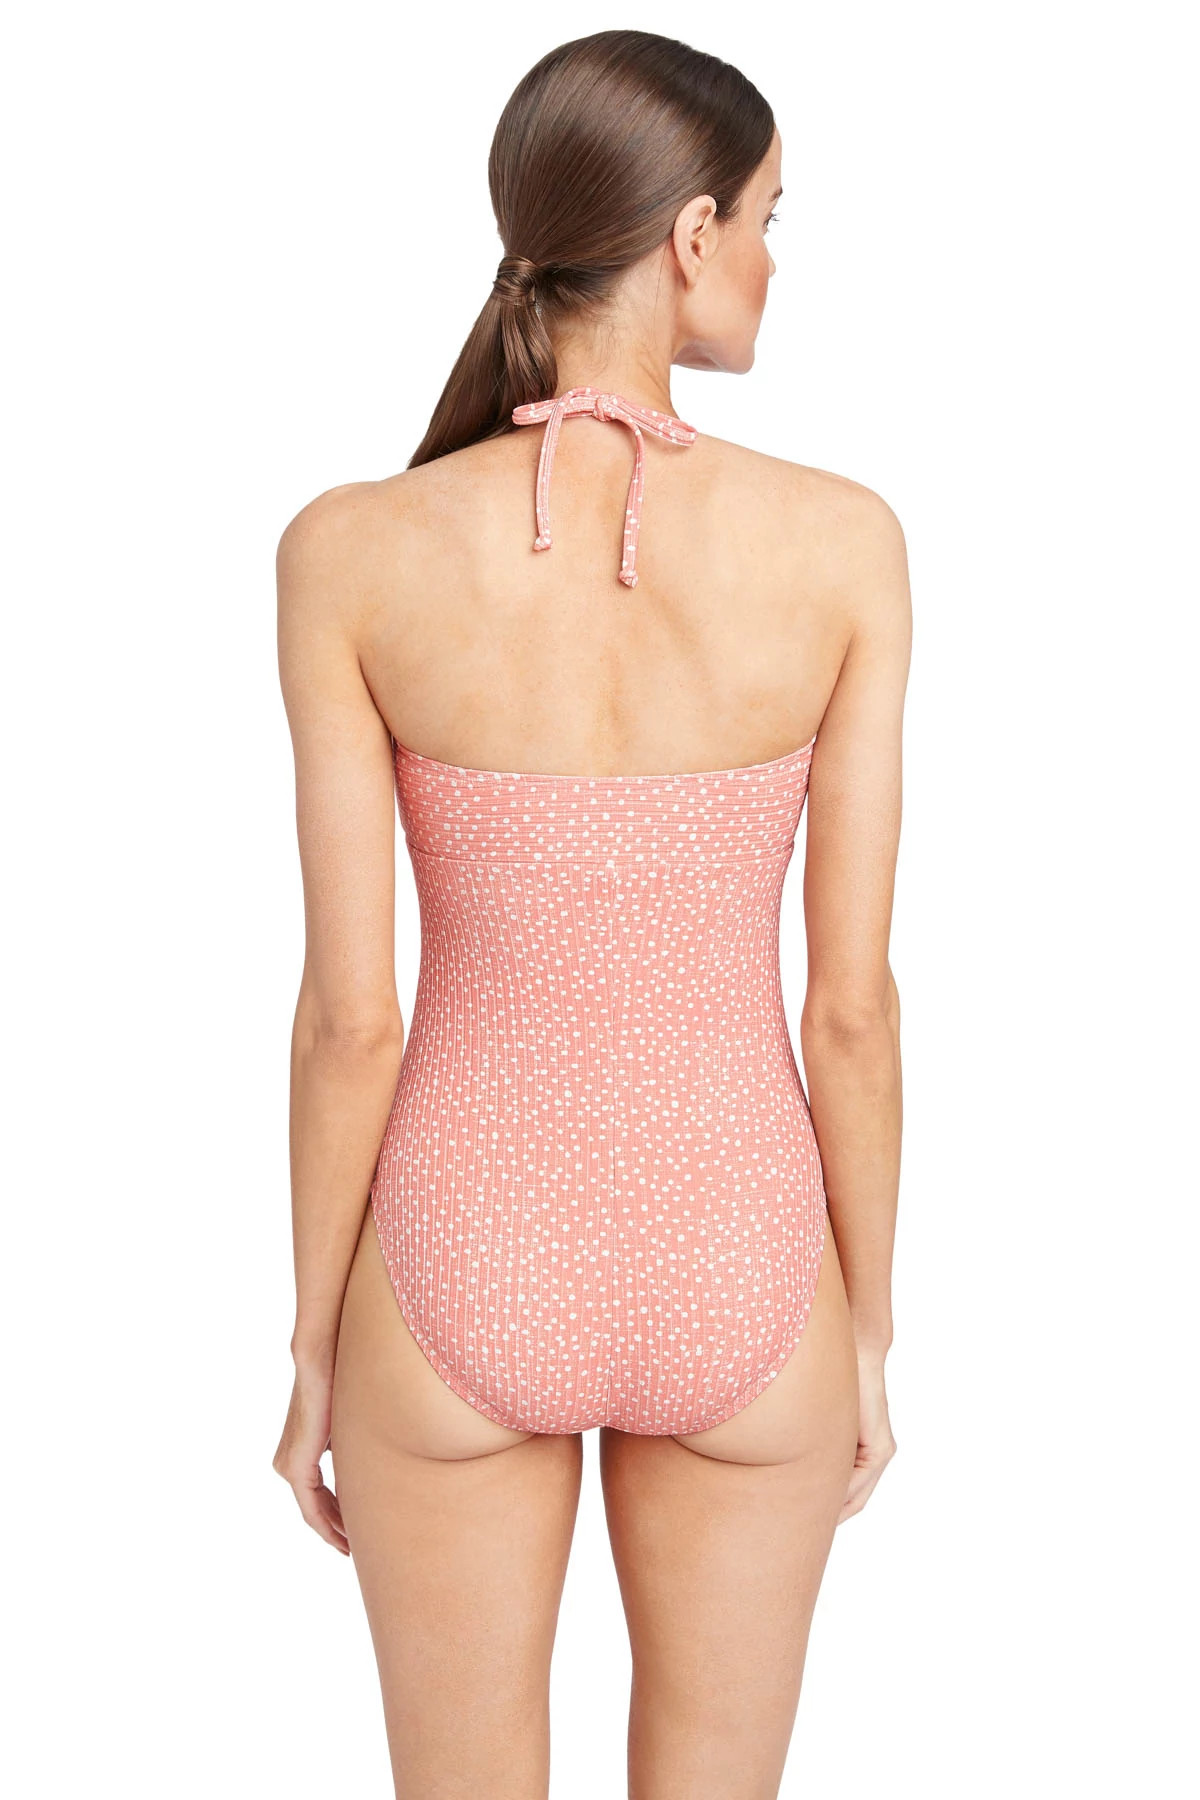 BLUSH Tie Front Bandeau One Piece Swimsuit image number 3